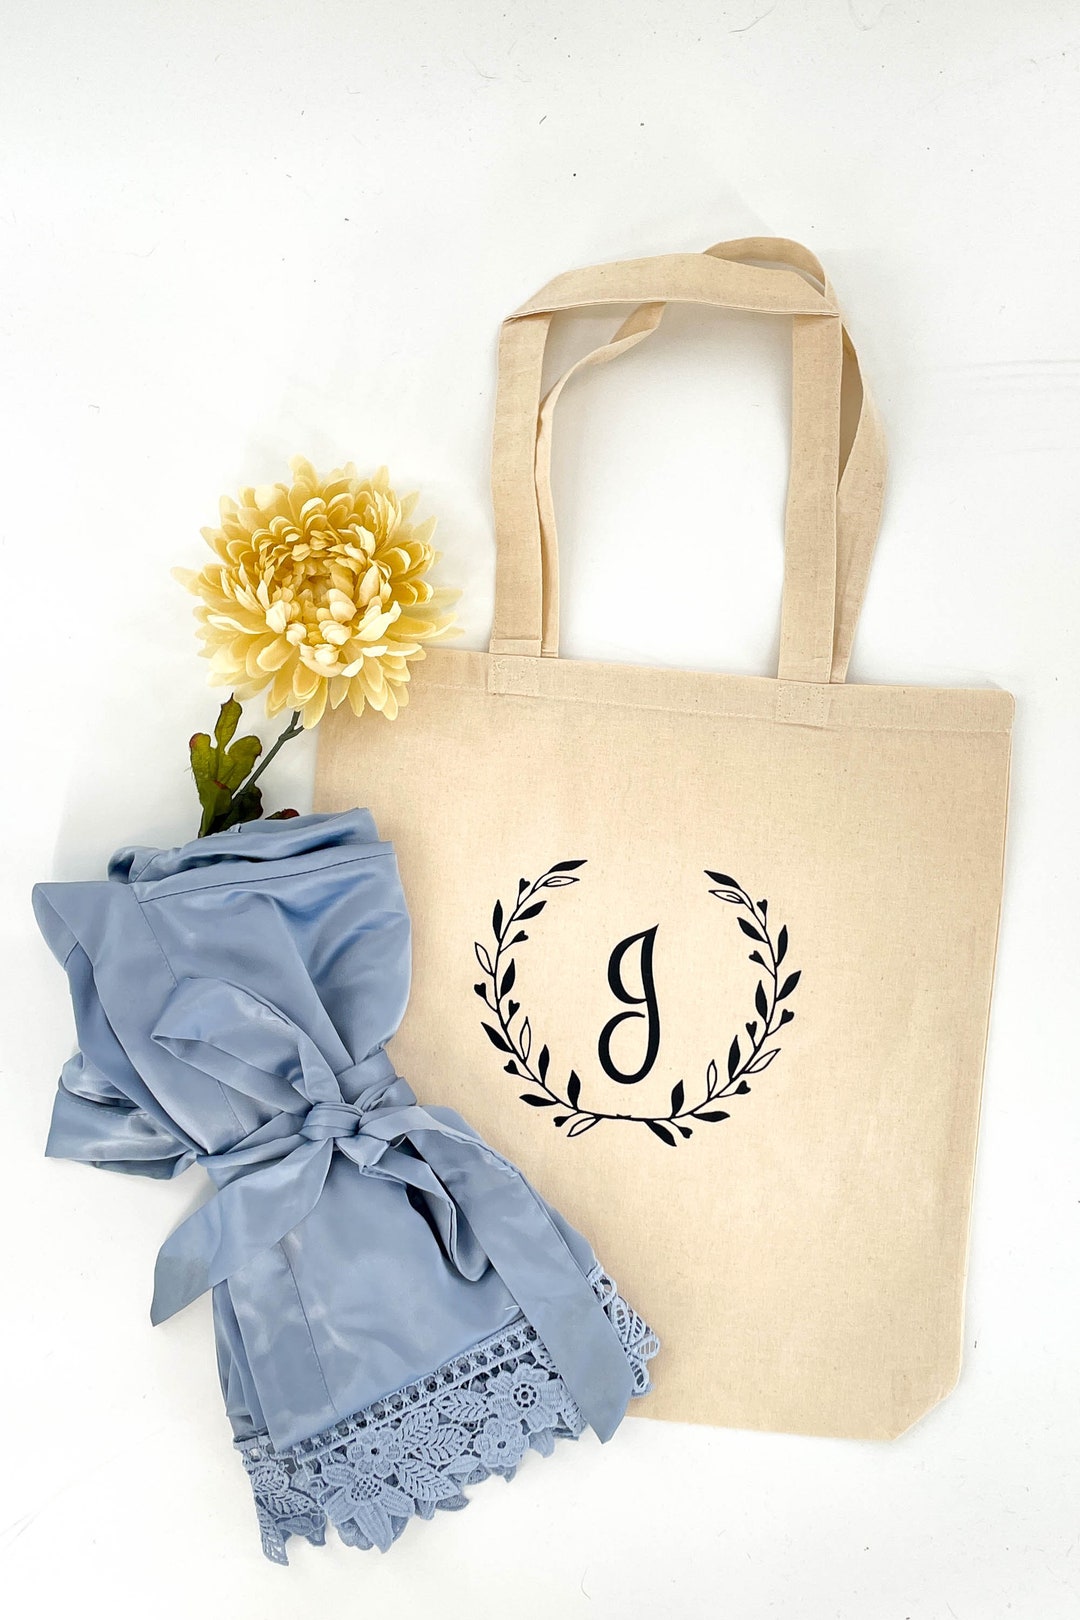 Personalized Tote Bag and Organizer - On the Go Travel Set - LaLa Confetti